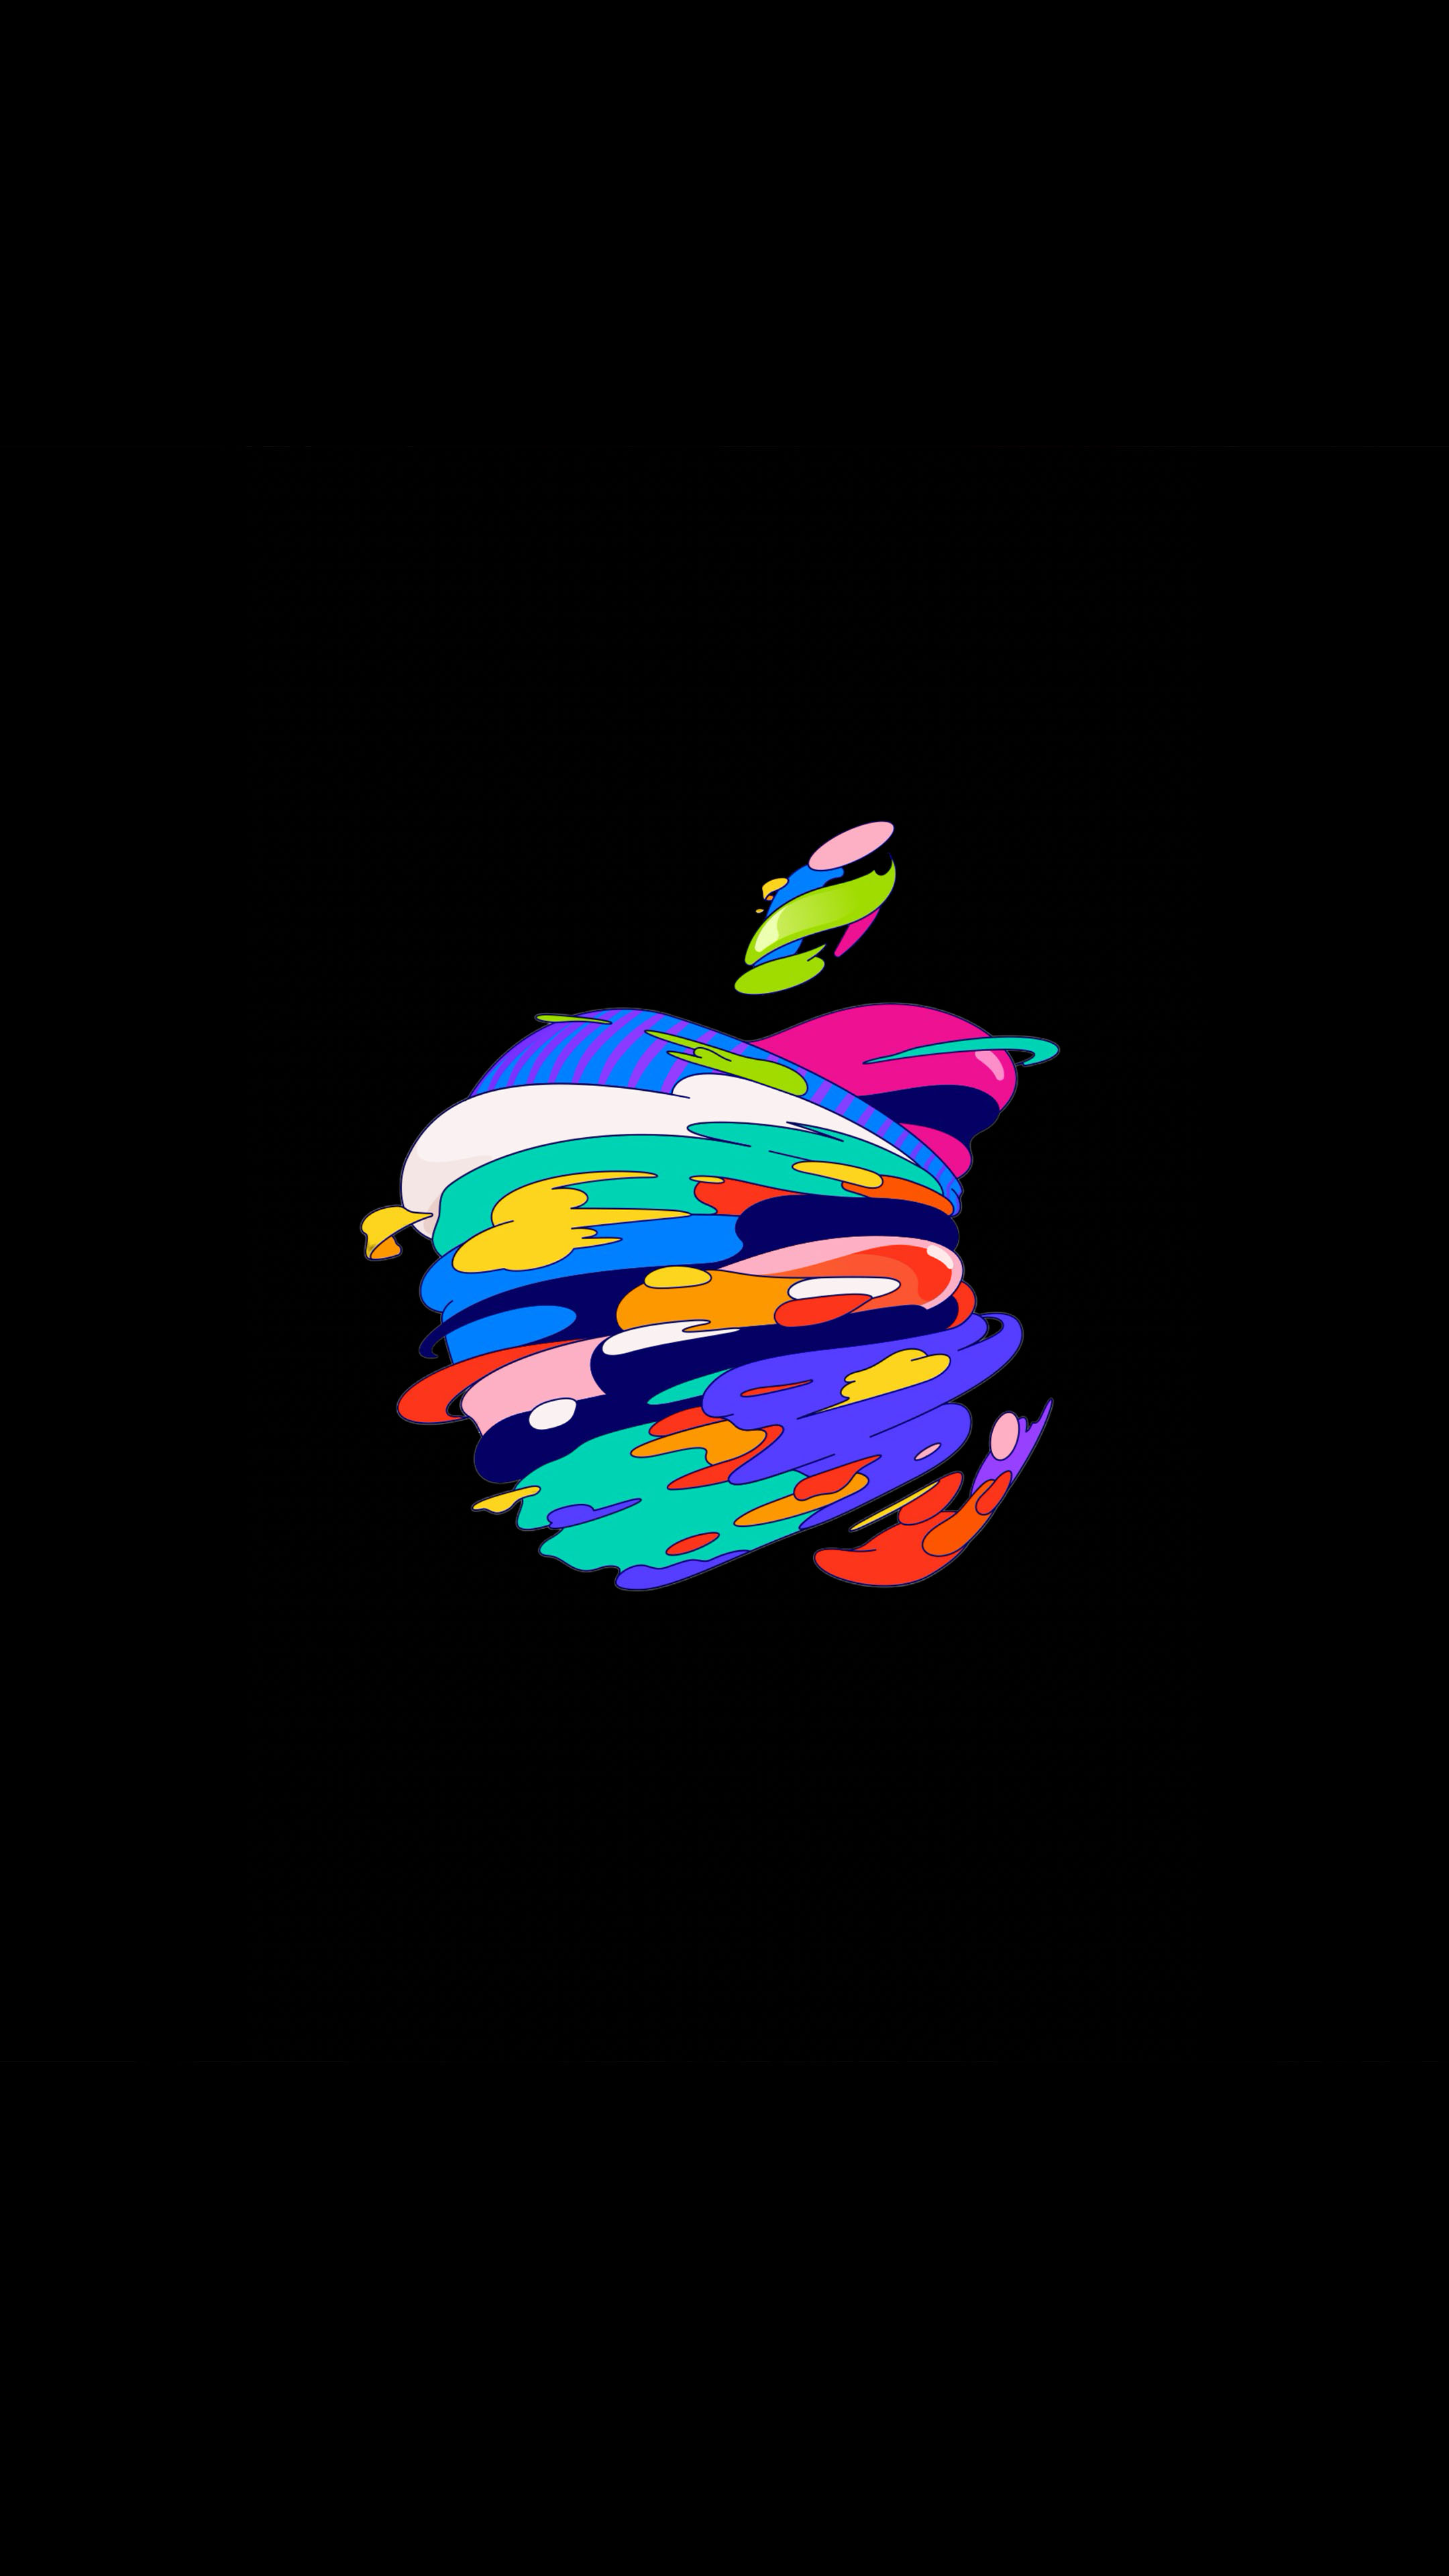 Technology Colorful Apple Logo In Black Background 4K HD Apple Wallpapers  HD  Wallpapers  ID 99279